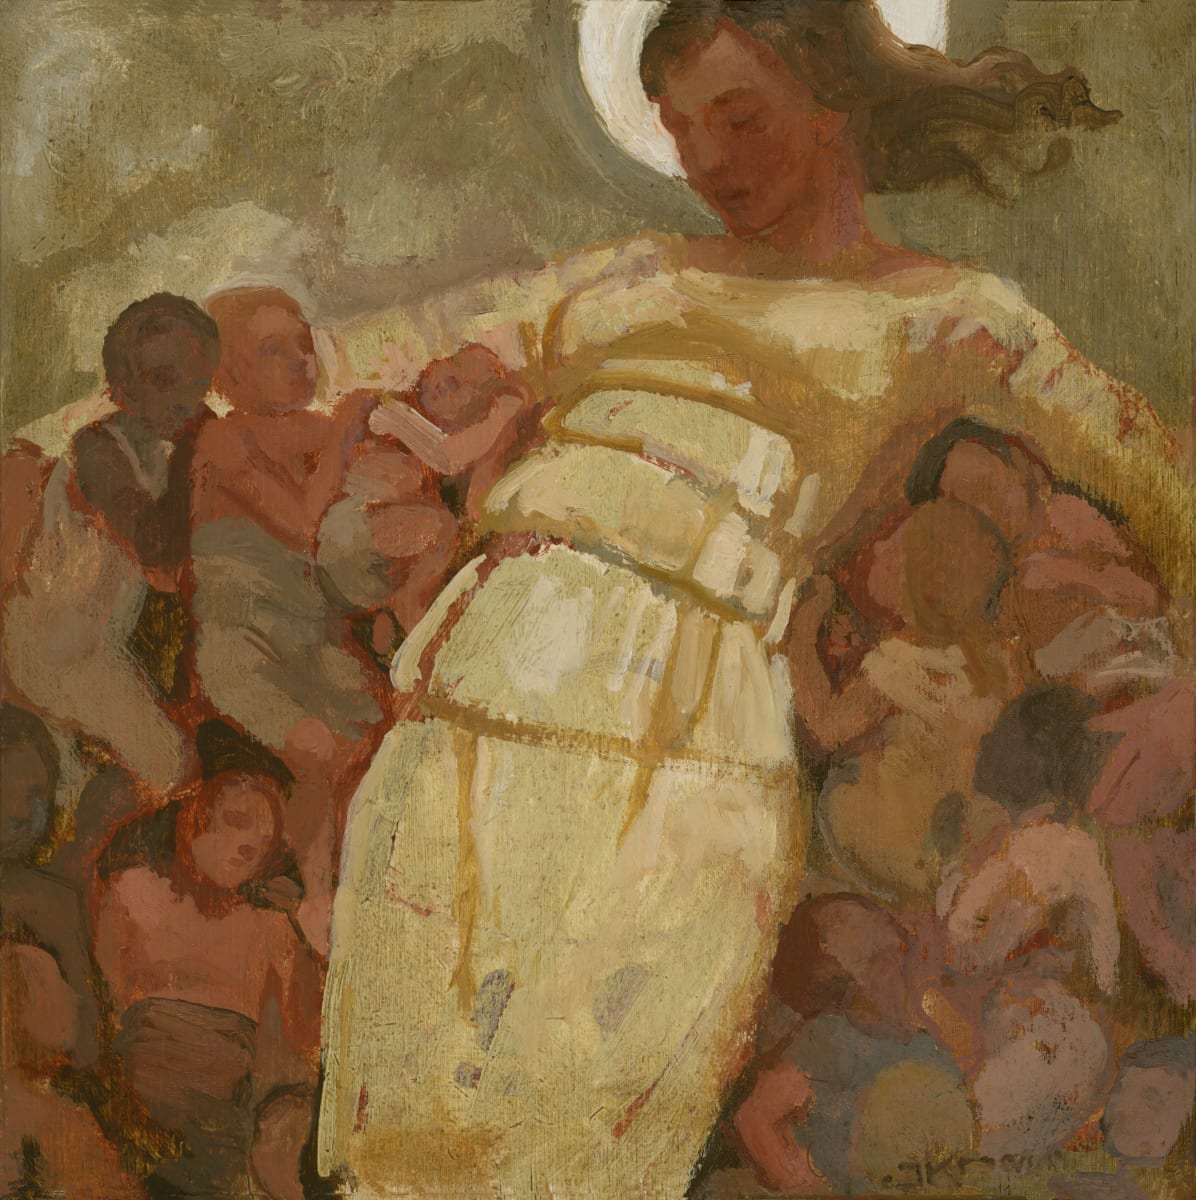 In the Sanctuary of a Goddess by J. Kirk Richards  Image: A goddess gathers her children. 